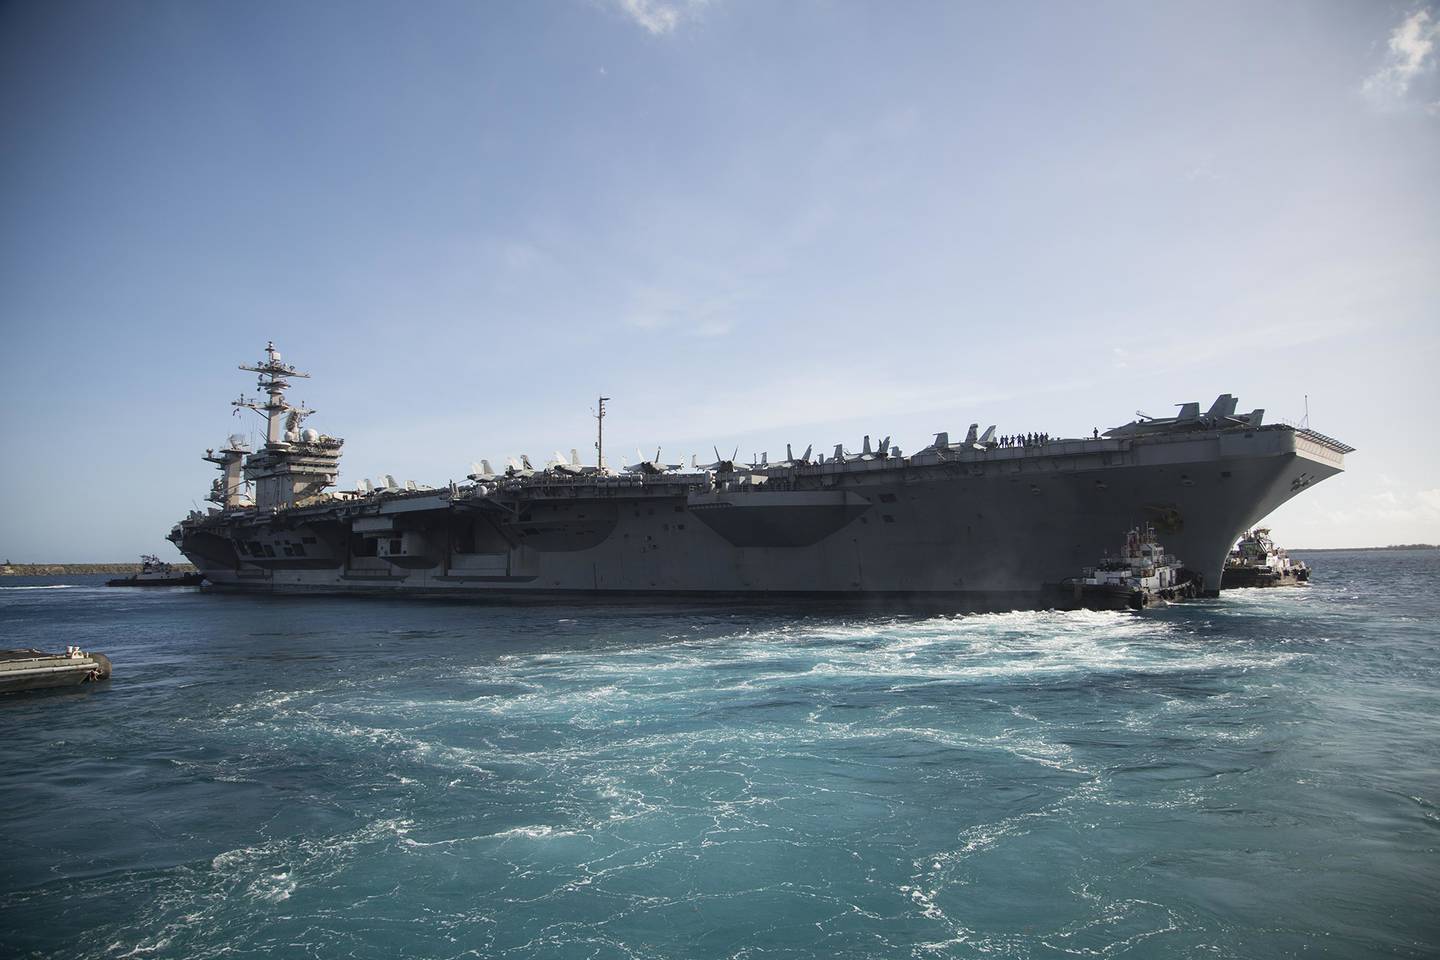 The aircraft carrier USS Theodore Roosevelt (CVN 71) departs Apra Harbor on May 21, 2020, following an extended visit to Guam in the midst of the COVID-19 global pandemic.